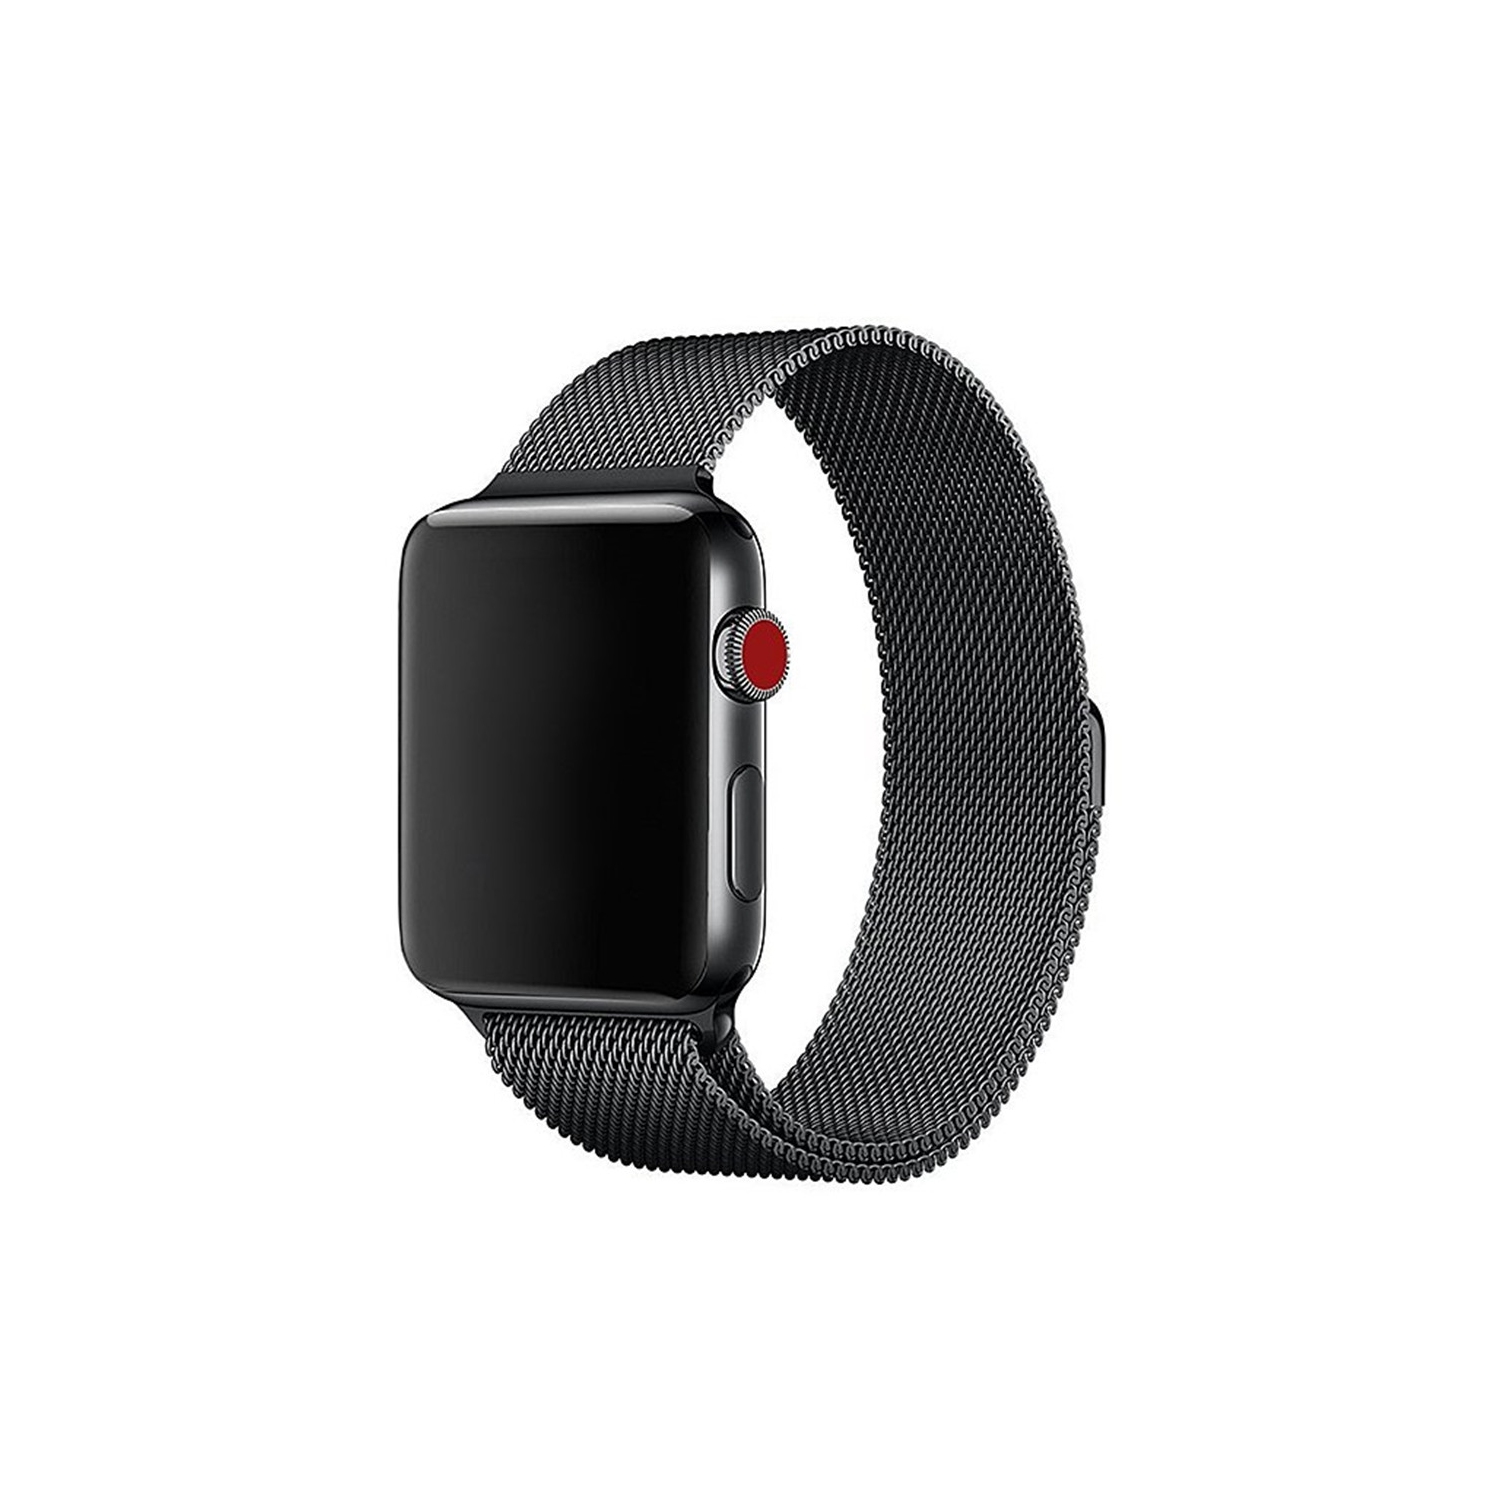 Magnetic Metal Mesh Replacement Band Strap for Apple Watch iWatch